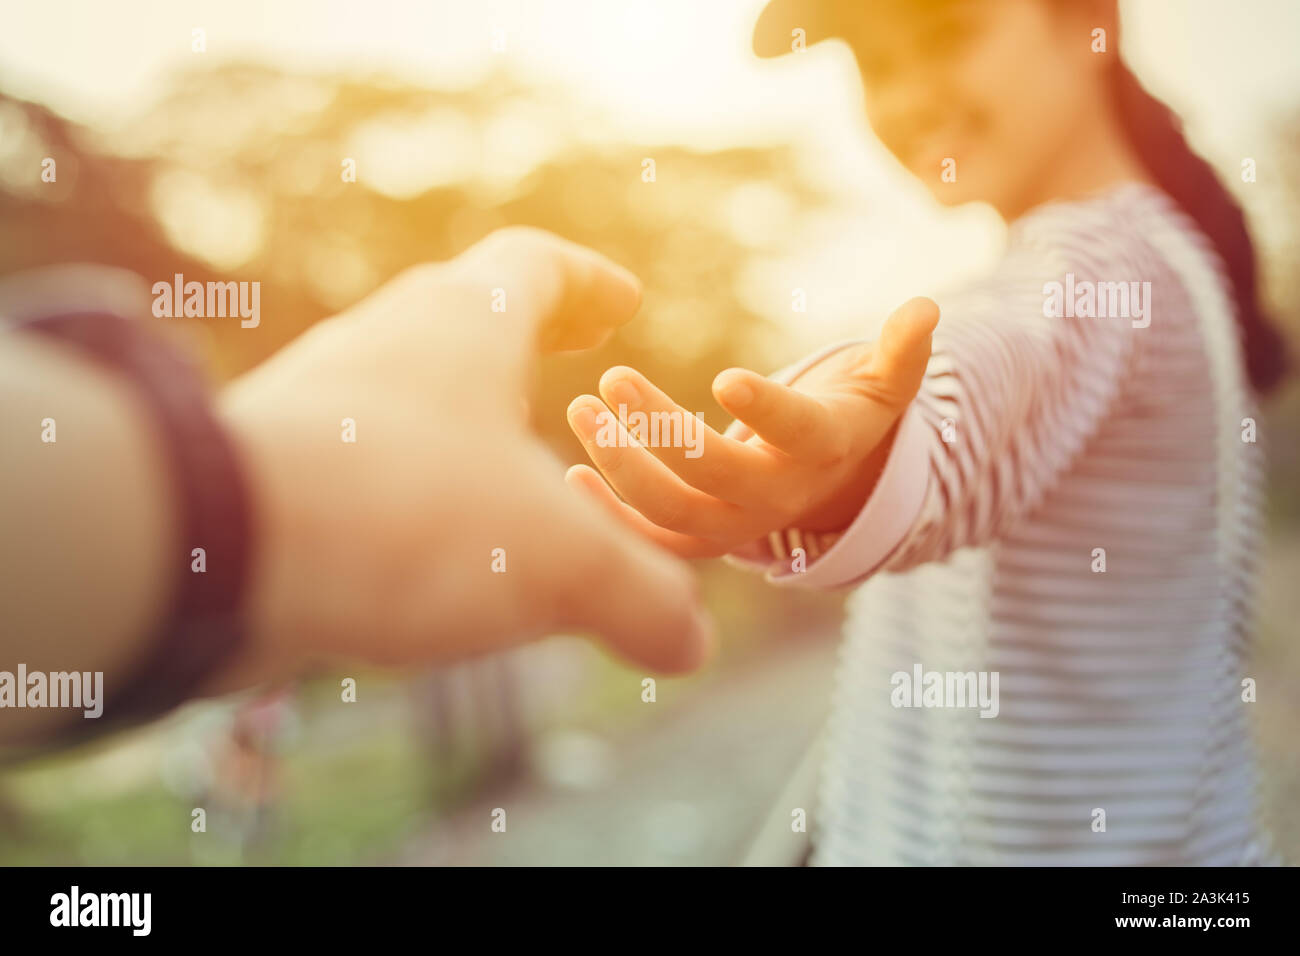 Girl teen smiling and reach her hand. Help Touch Care Support be a Good Friend with Love concept. Stock Photo